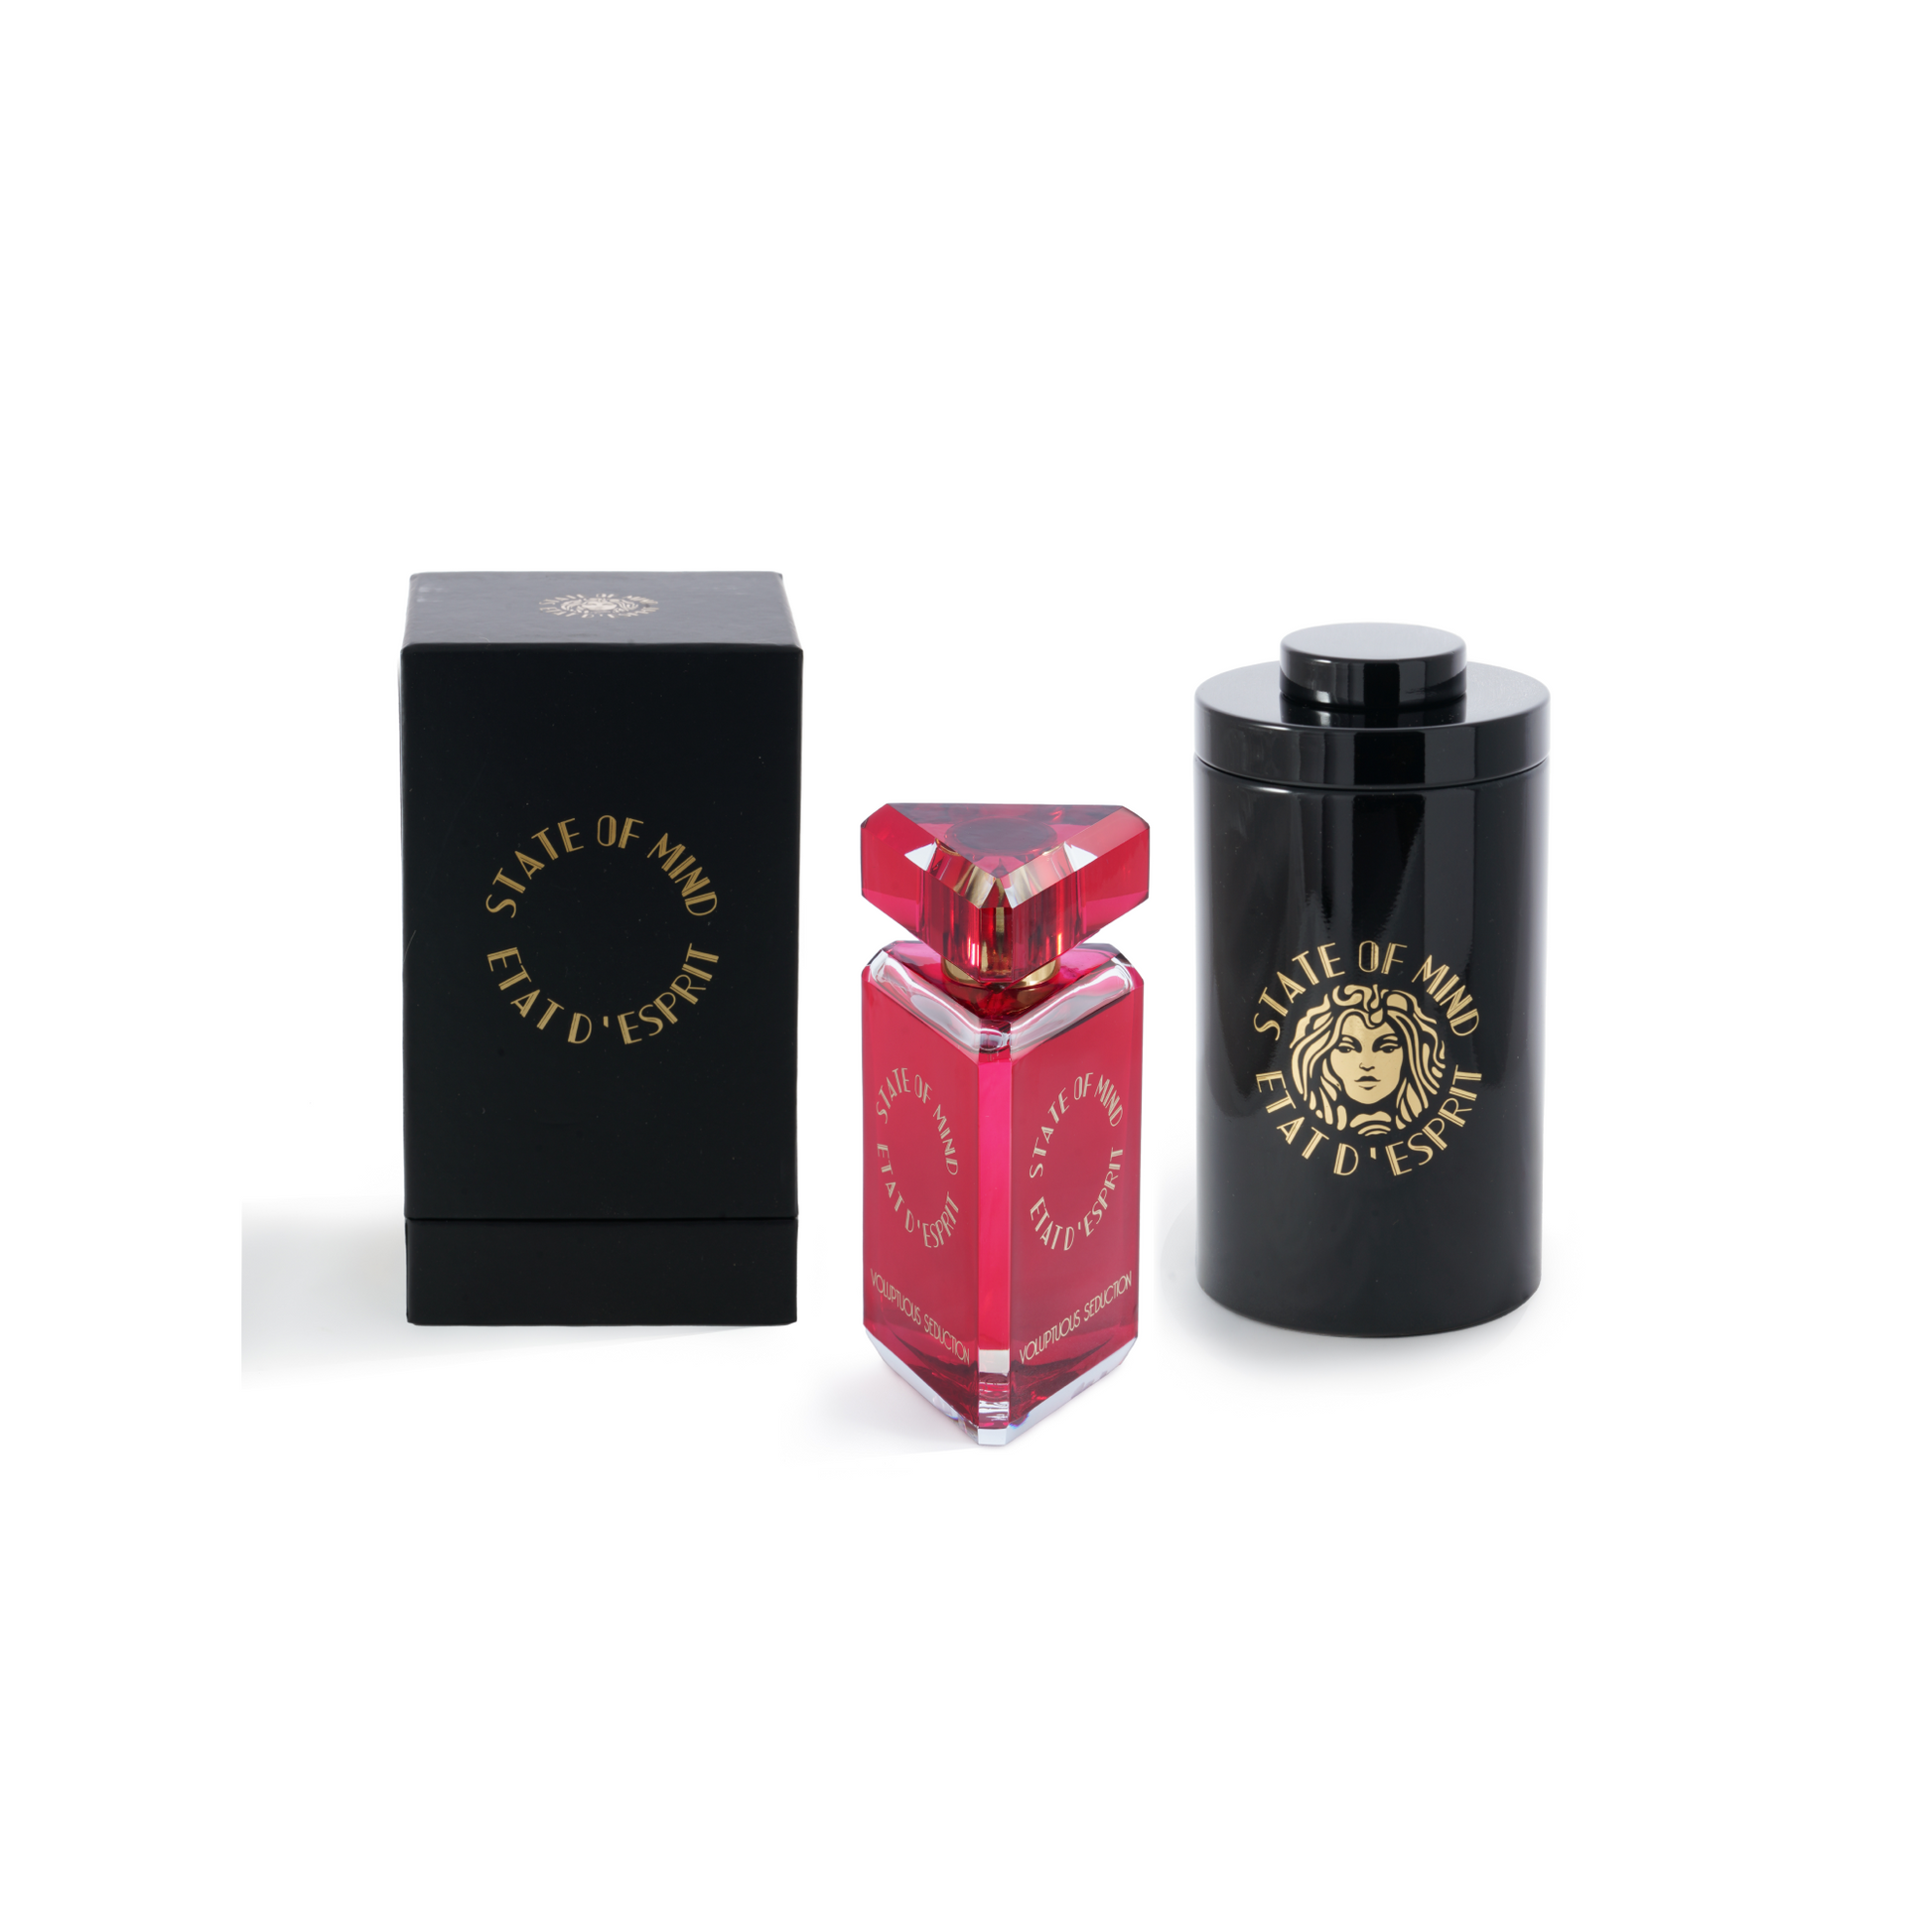 Voluptuous Seduction Perfume 100ml Delicious rose fragrance State Of Mind